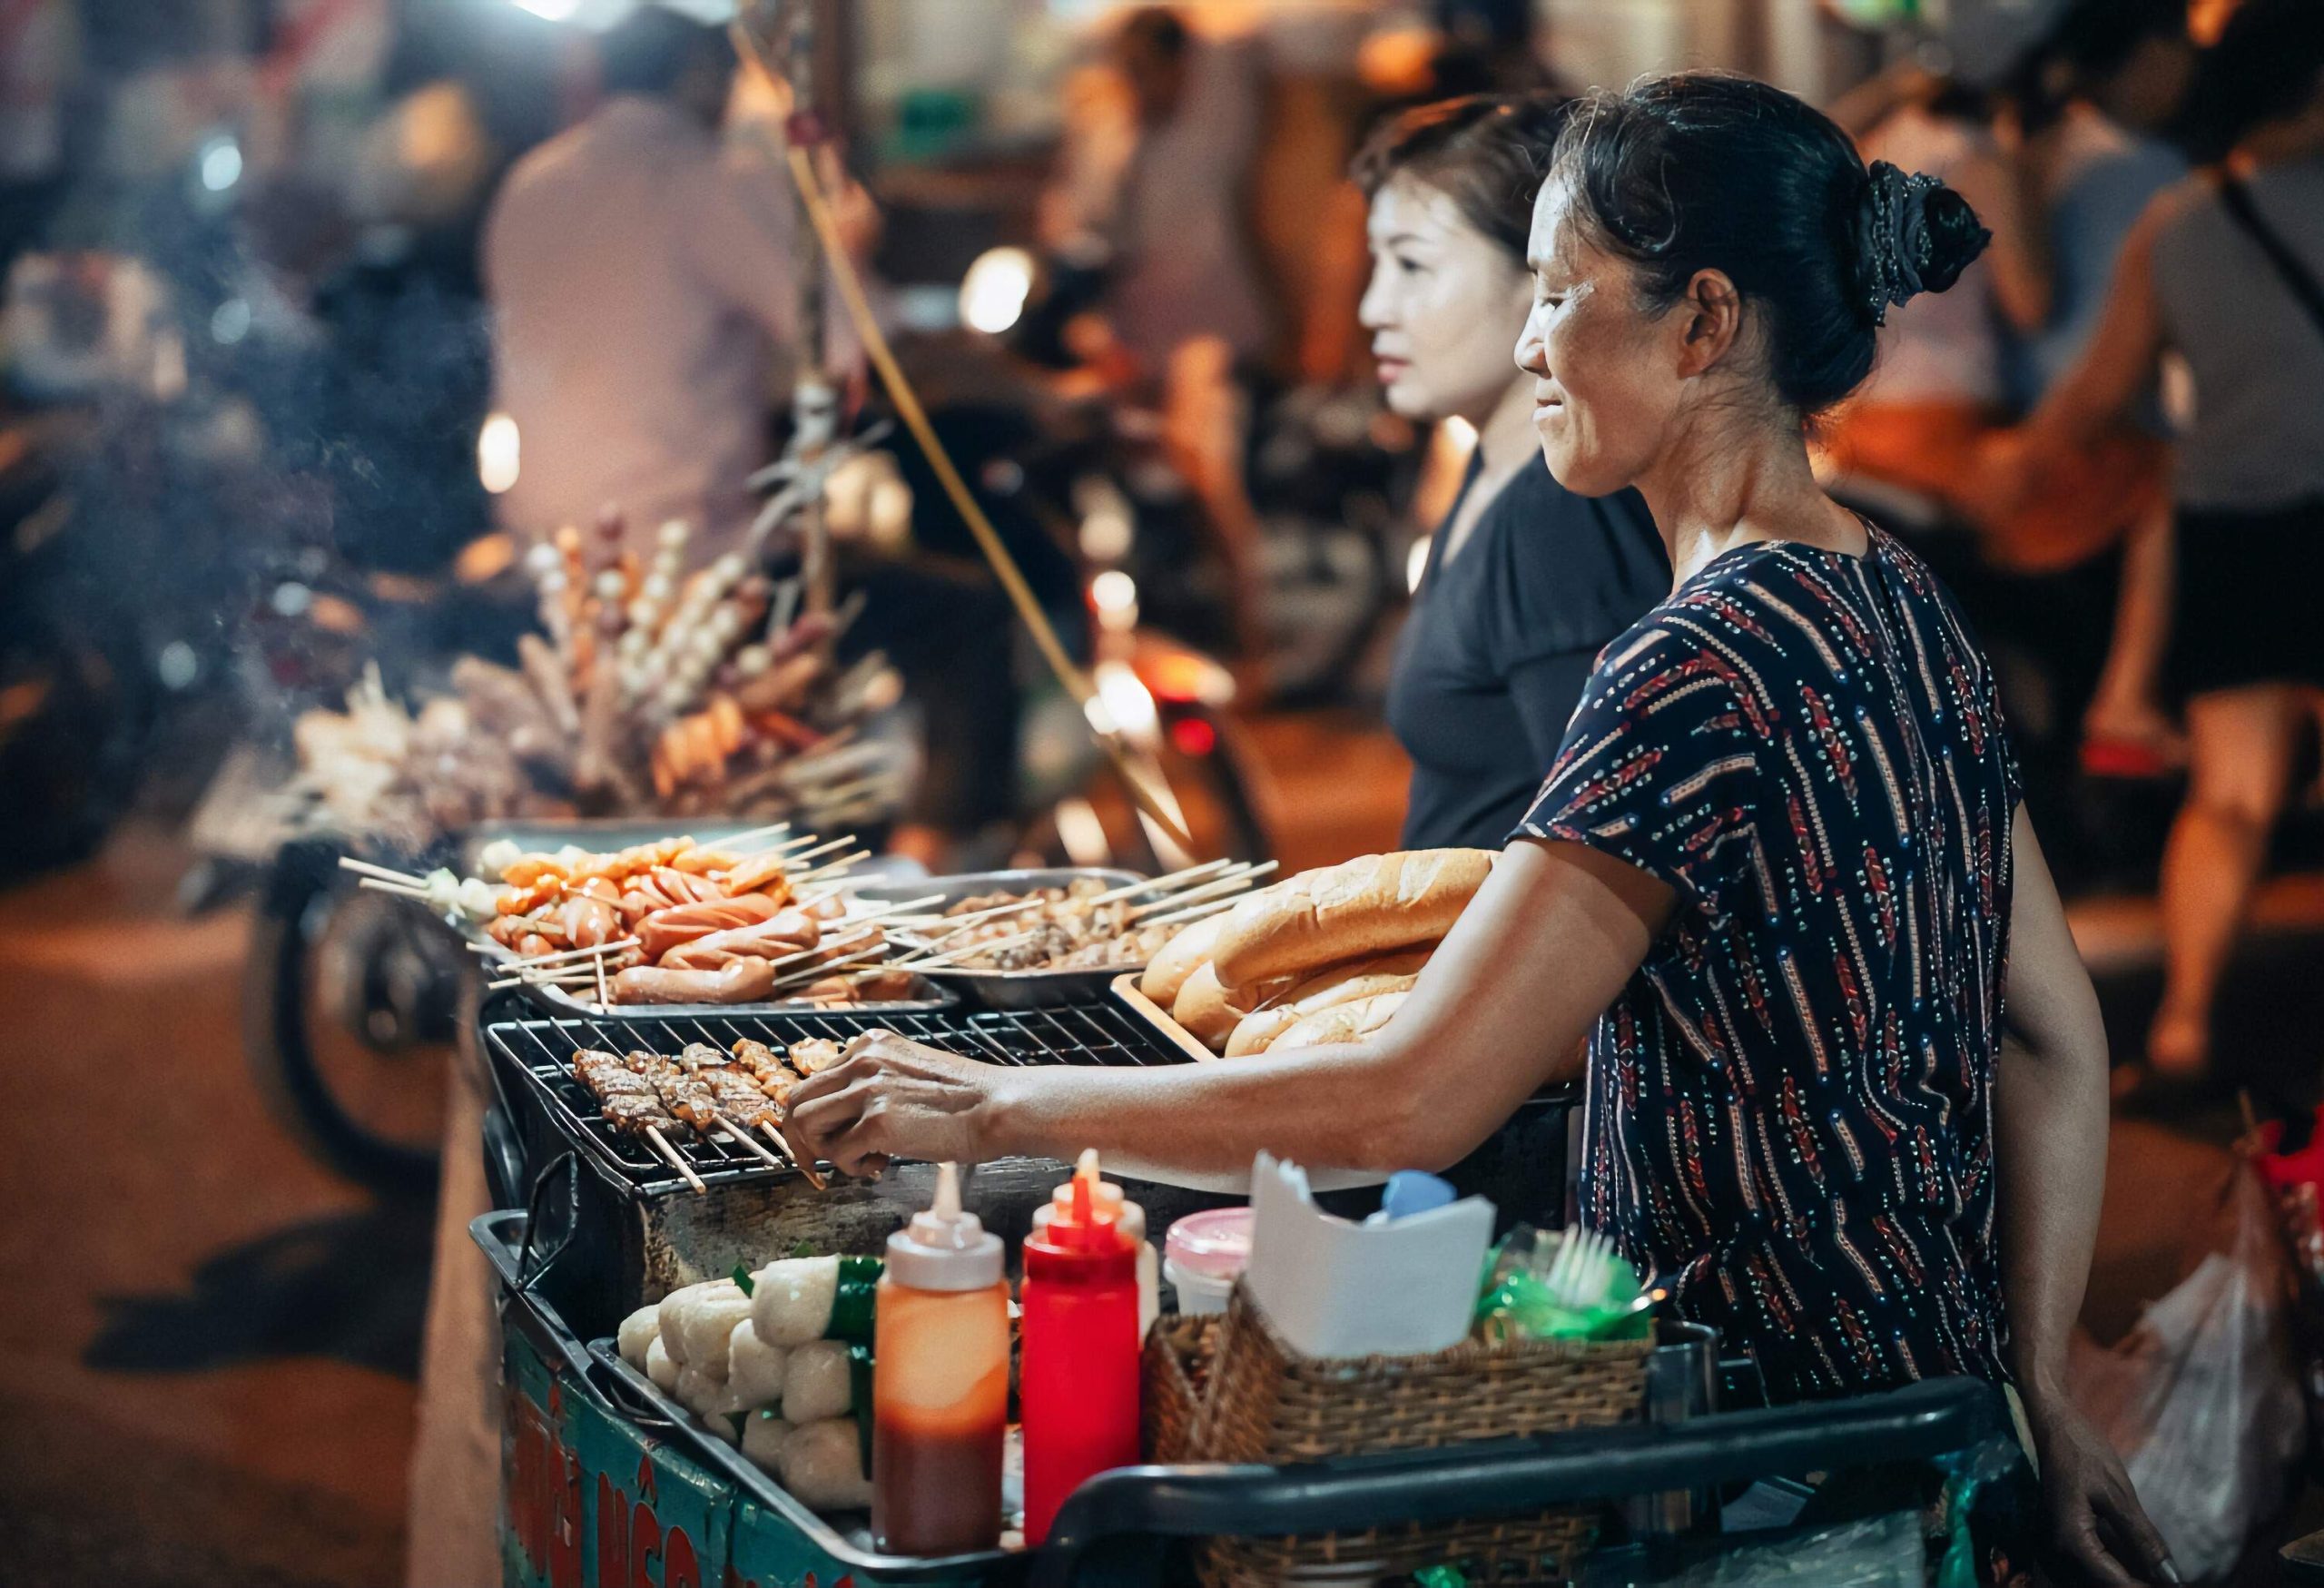 Two women selling grilled street food.